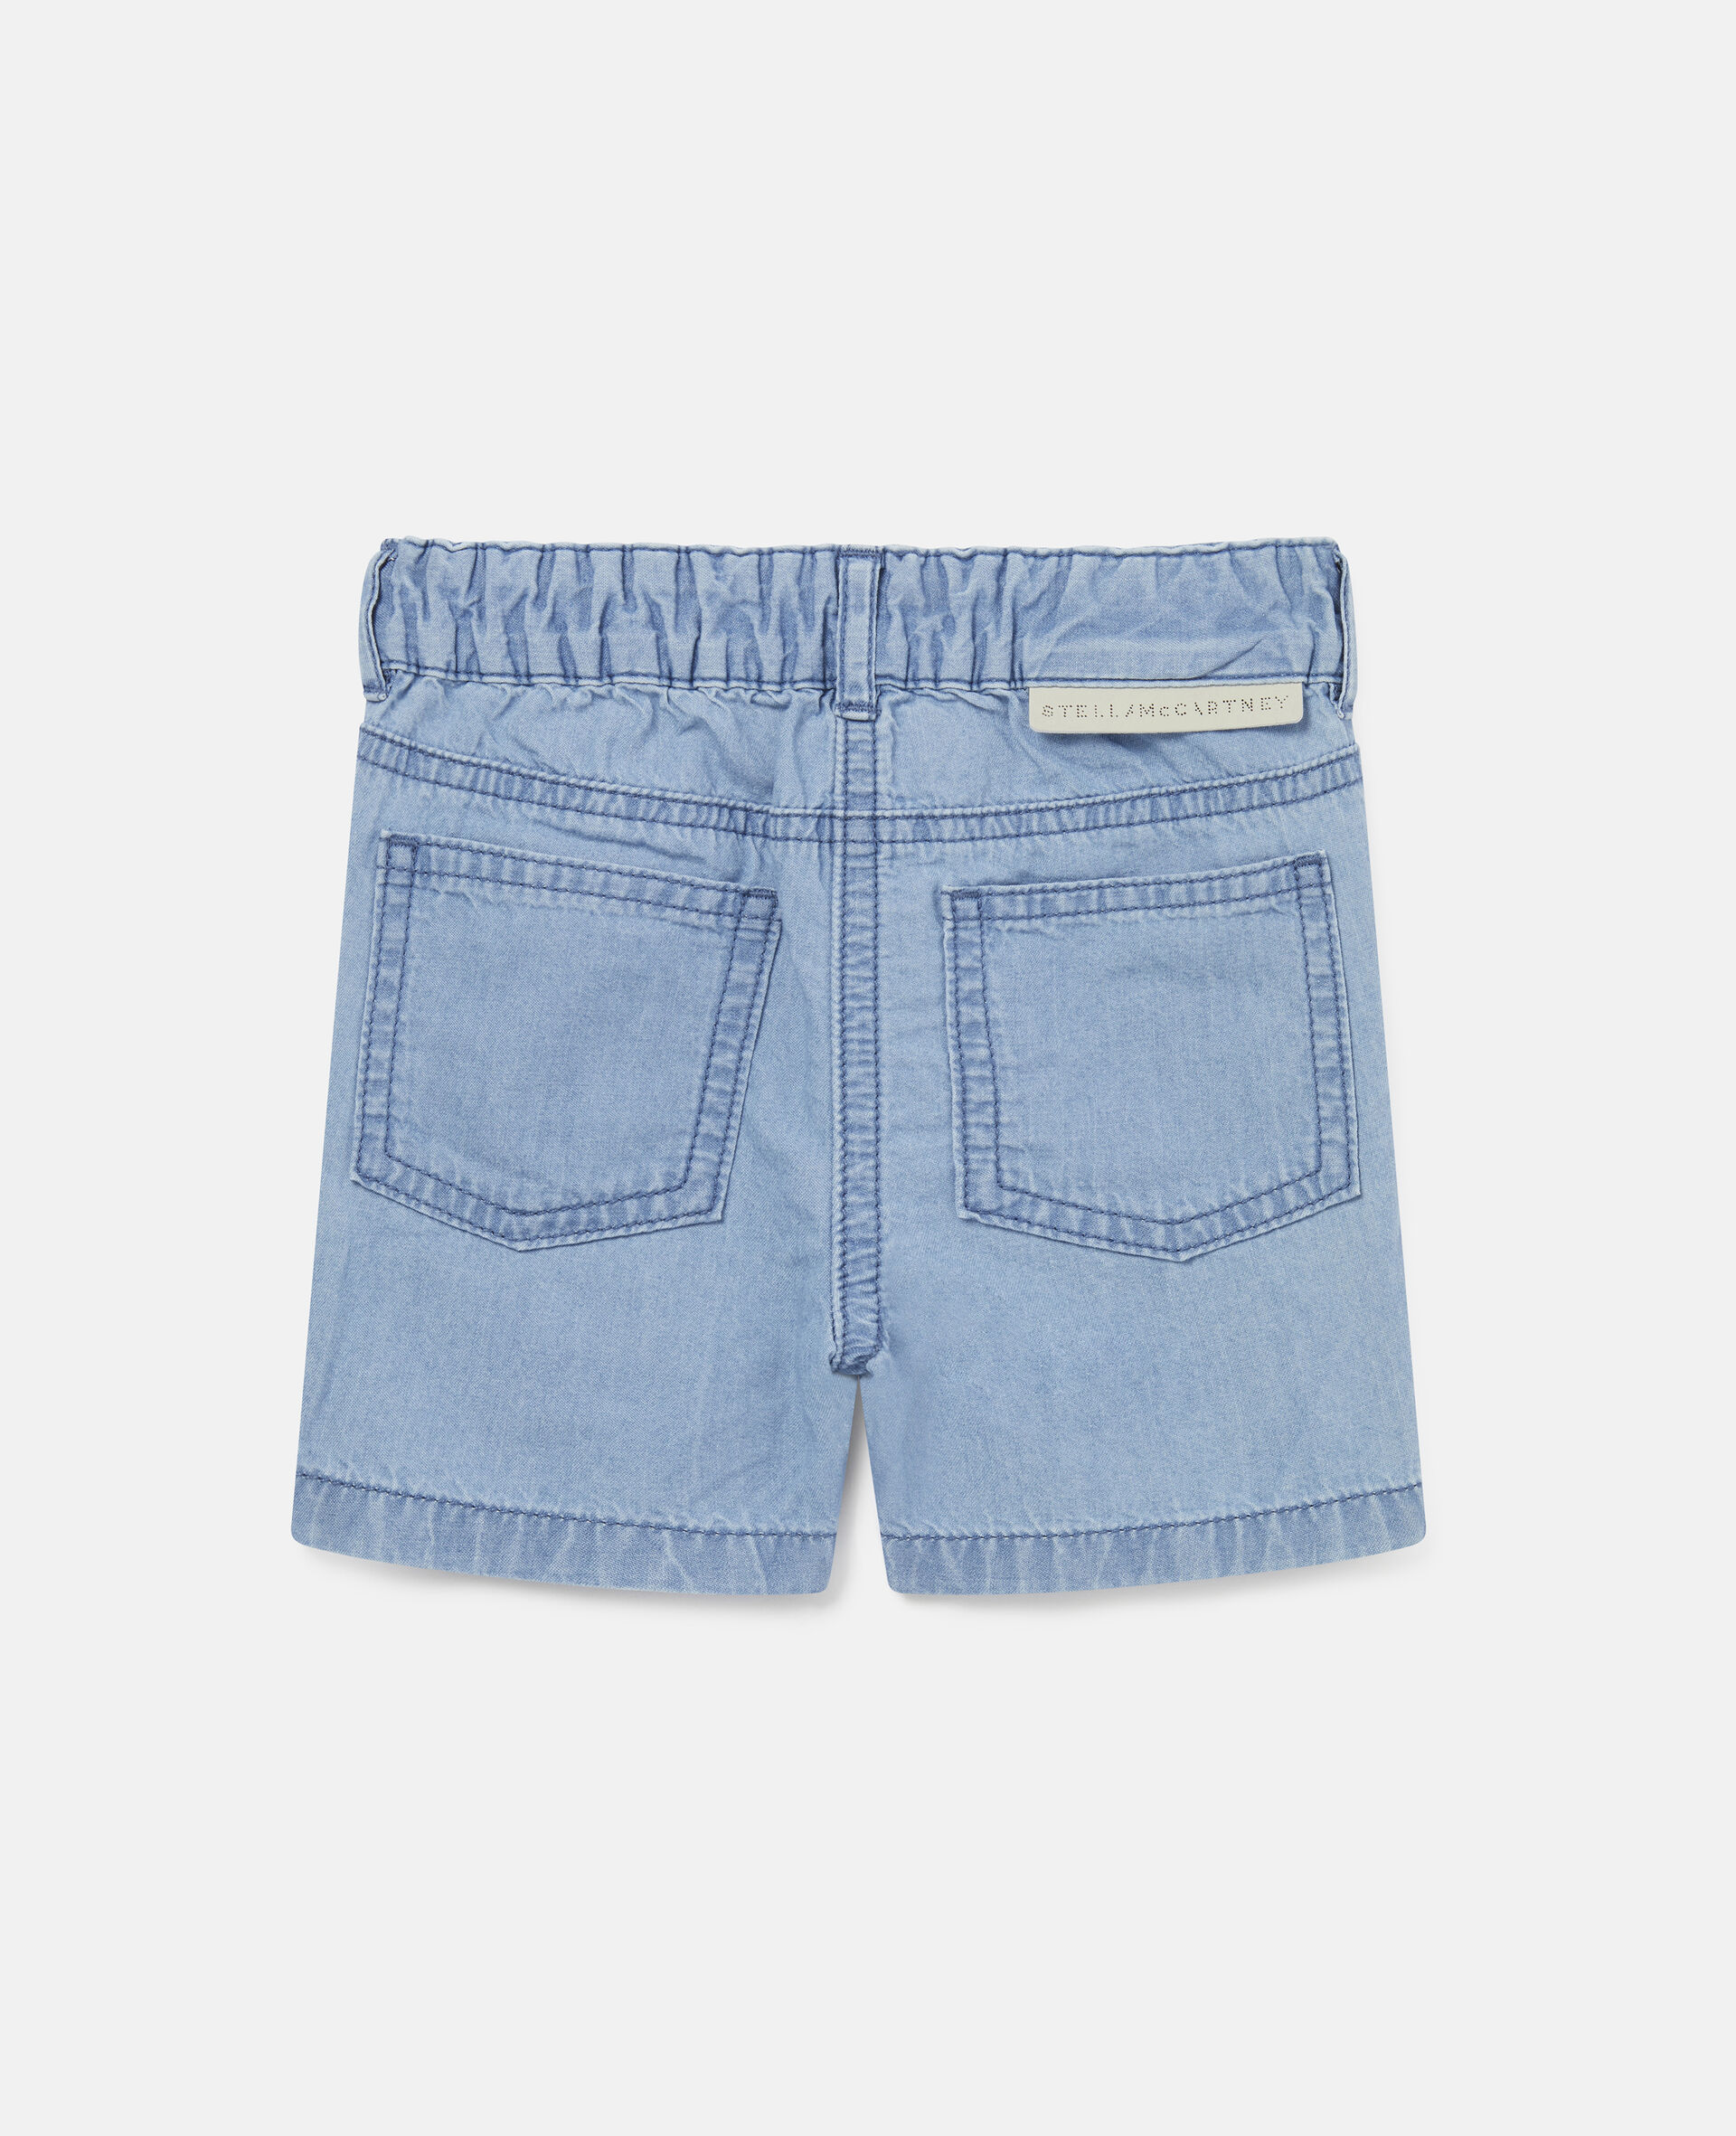 Chambray Flower Embroidered Shorts-Blue-large image number 2